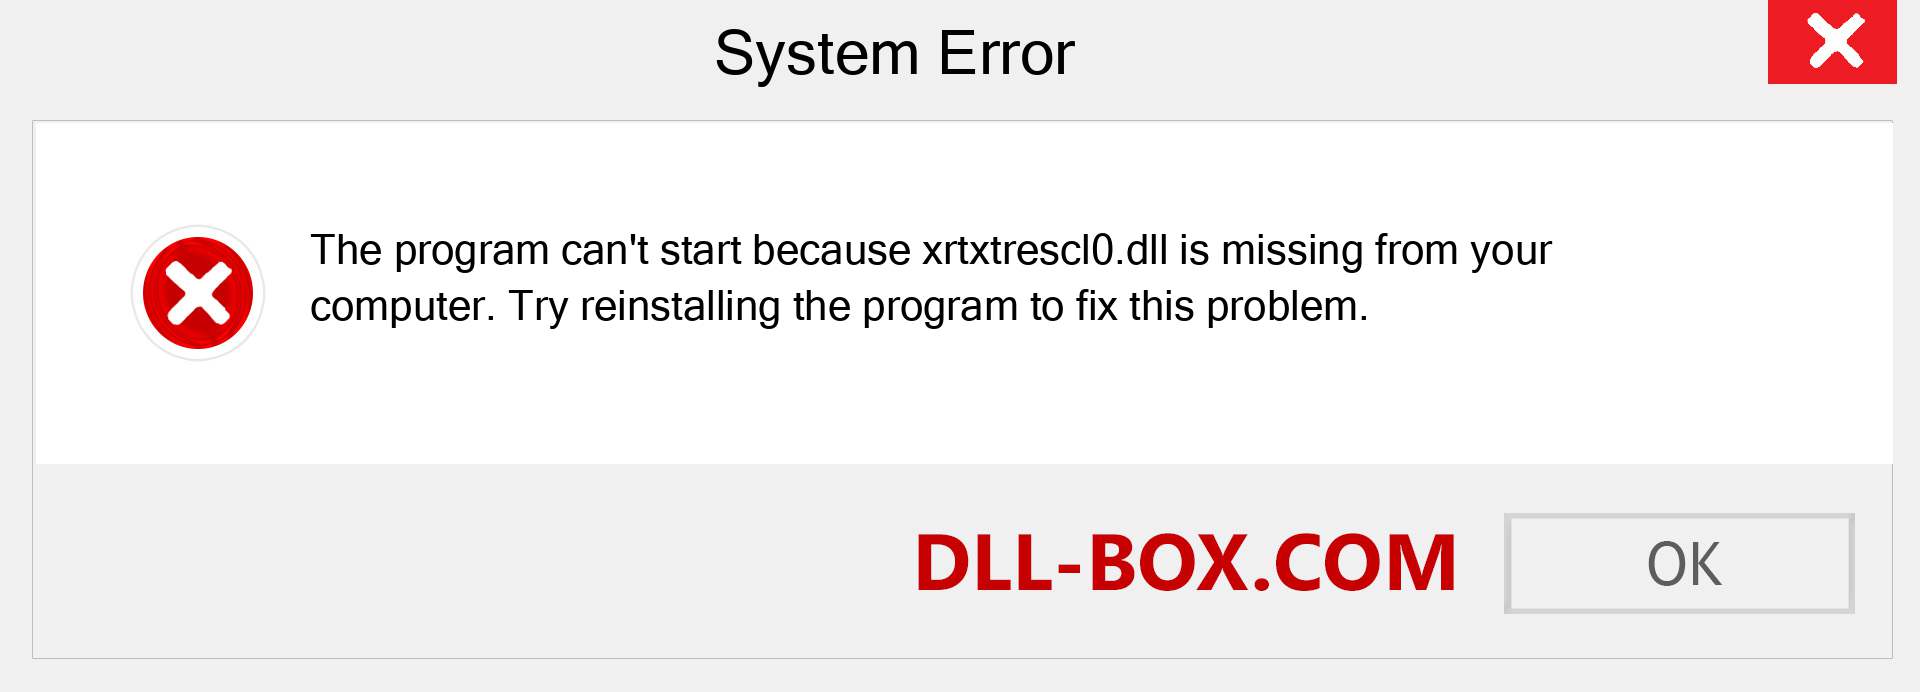  xrtxtrescl0.dll file is missing?. Download for Windows 7, 8, 10 - Fix  xrtxtrescl0 dll Missing Error on Windows, photos, images